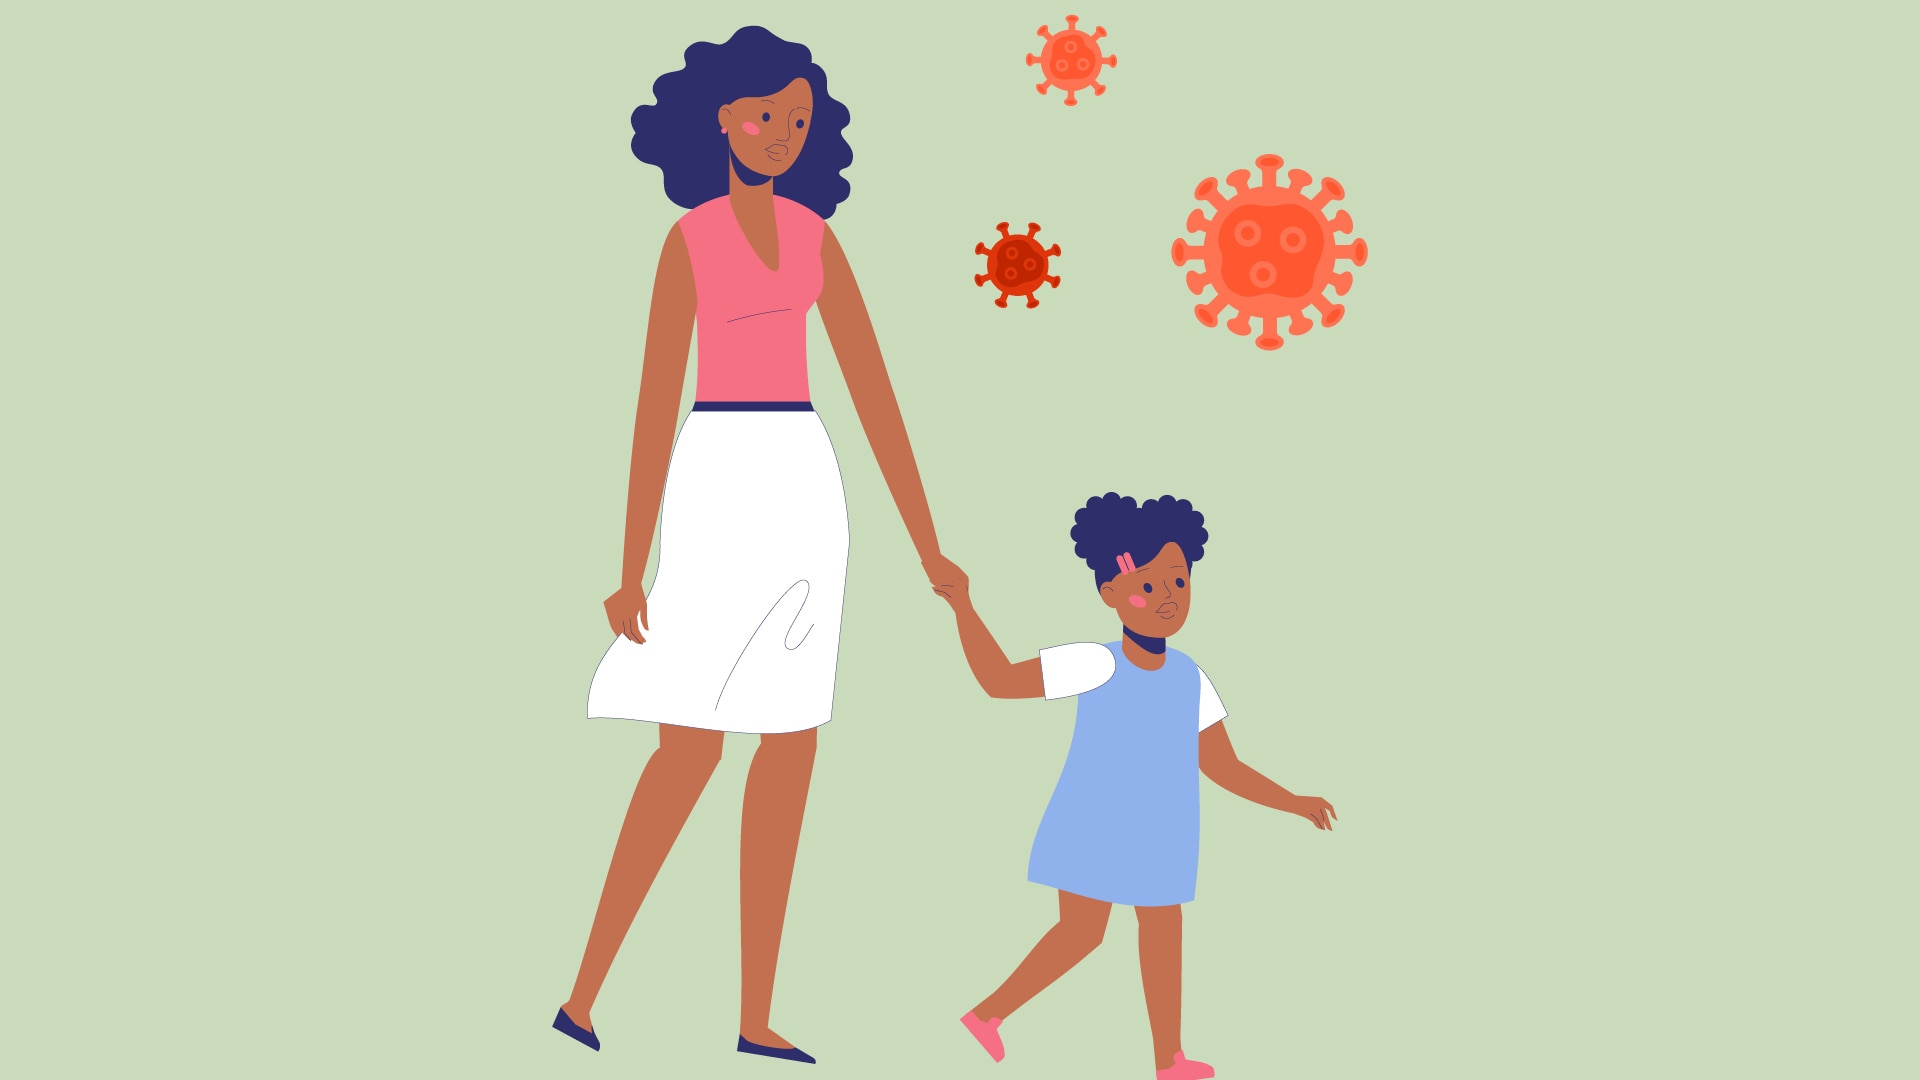 An illustration of a woman holding hands and walking with her young daughter with viruses in the air around them